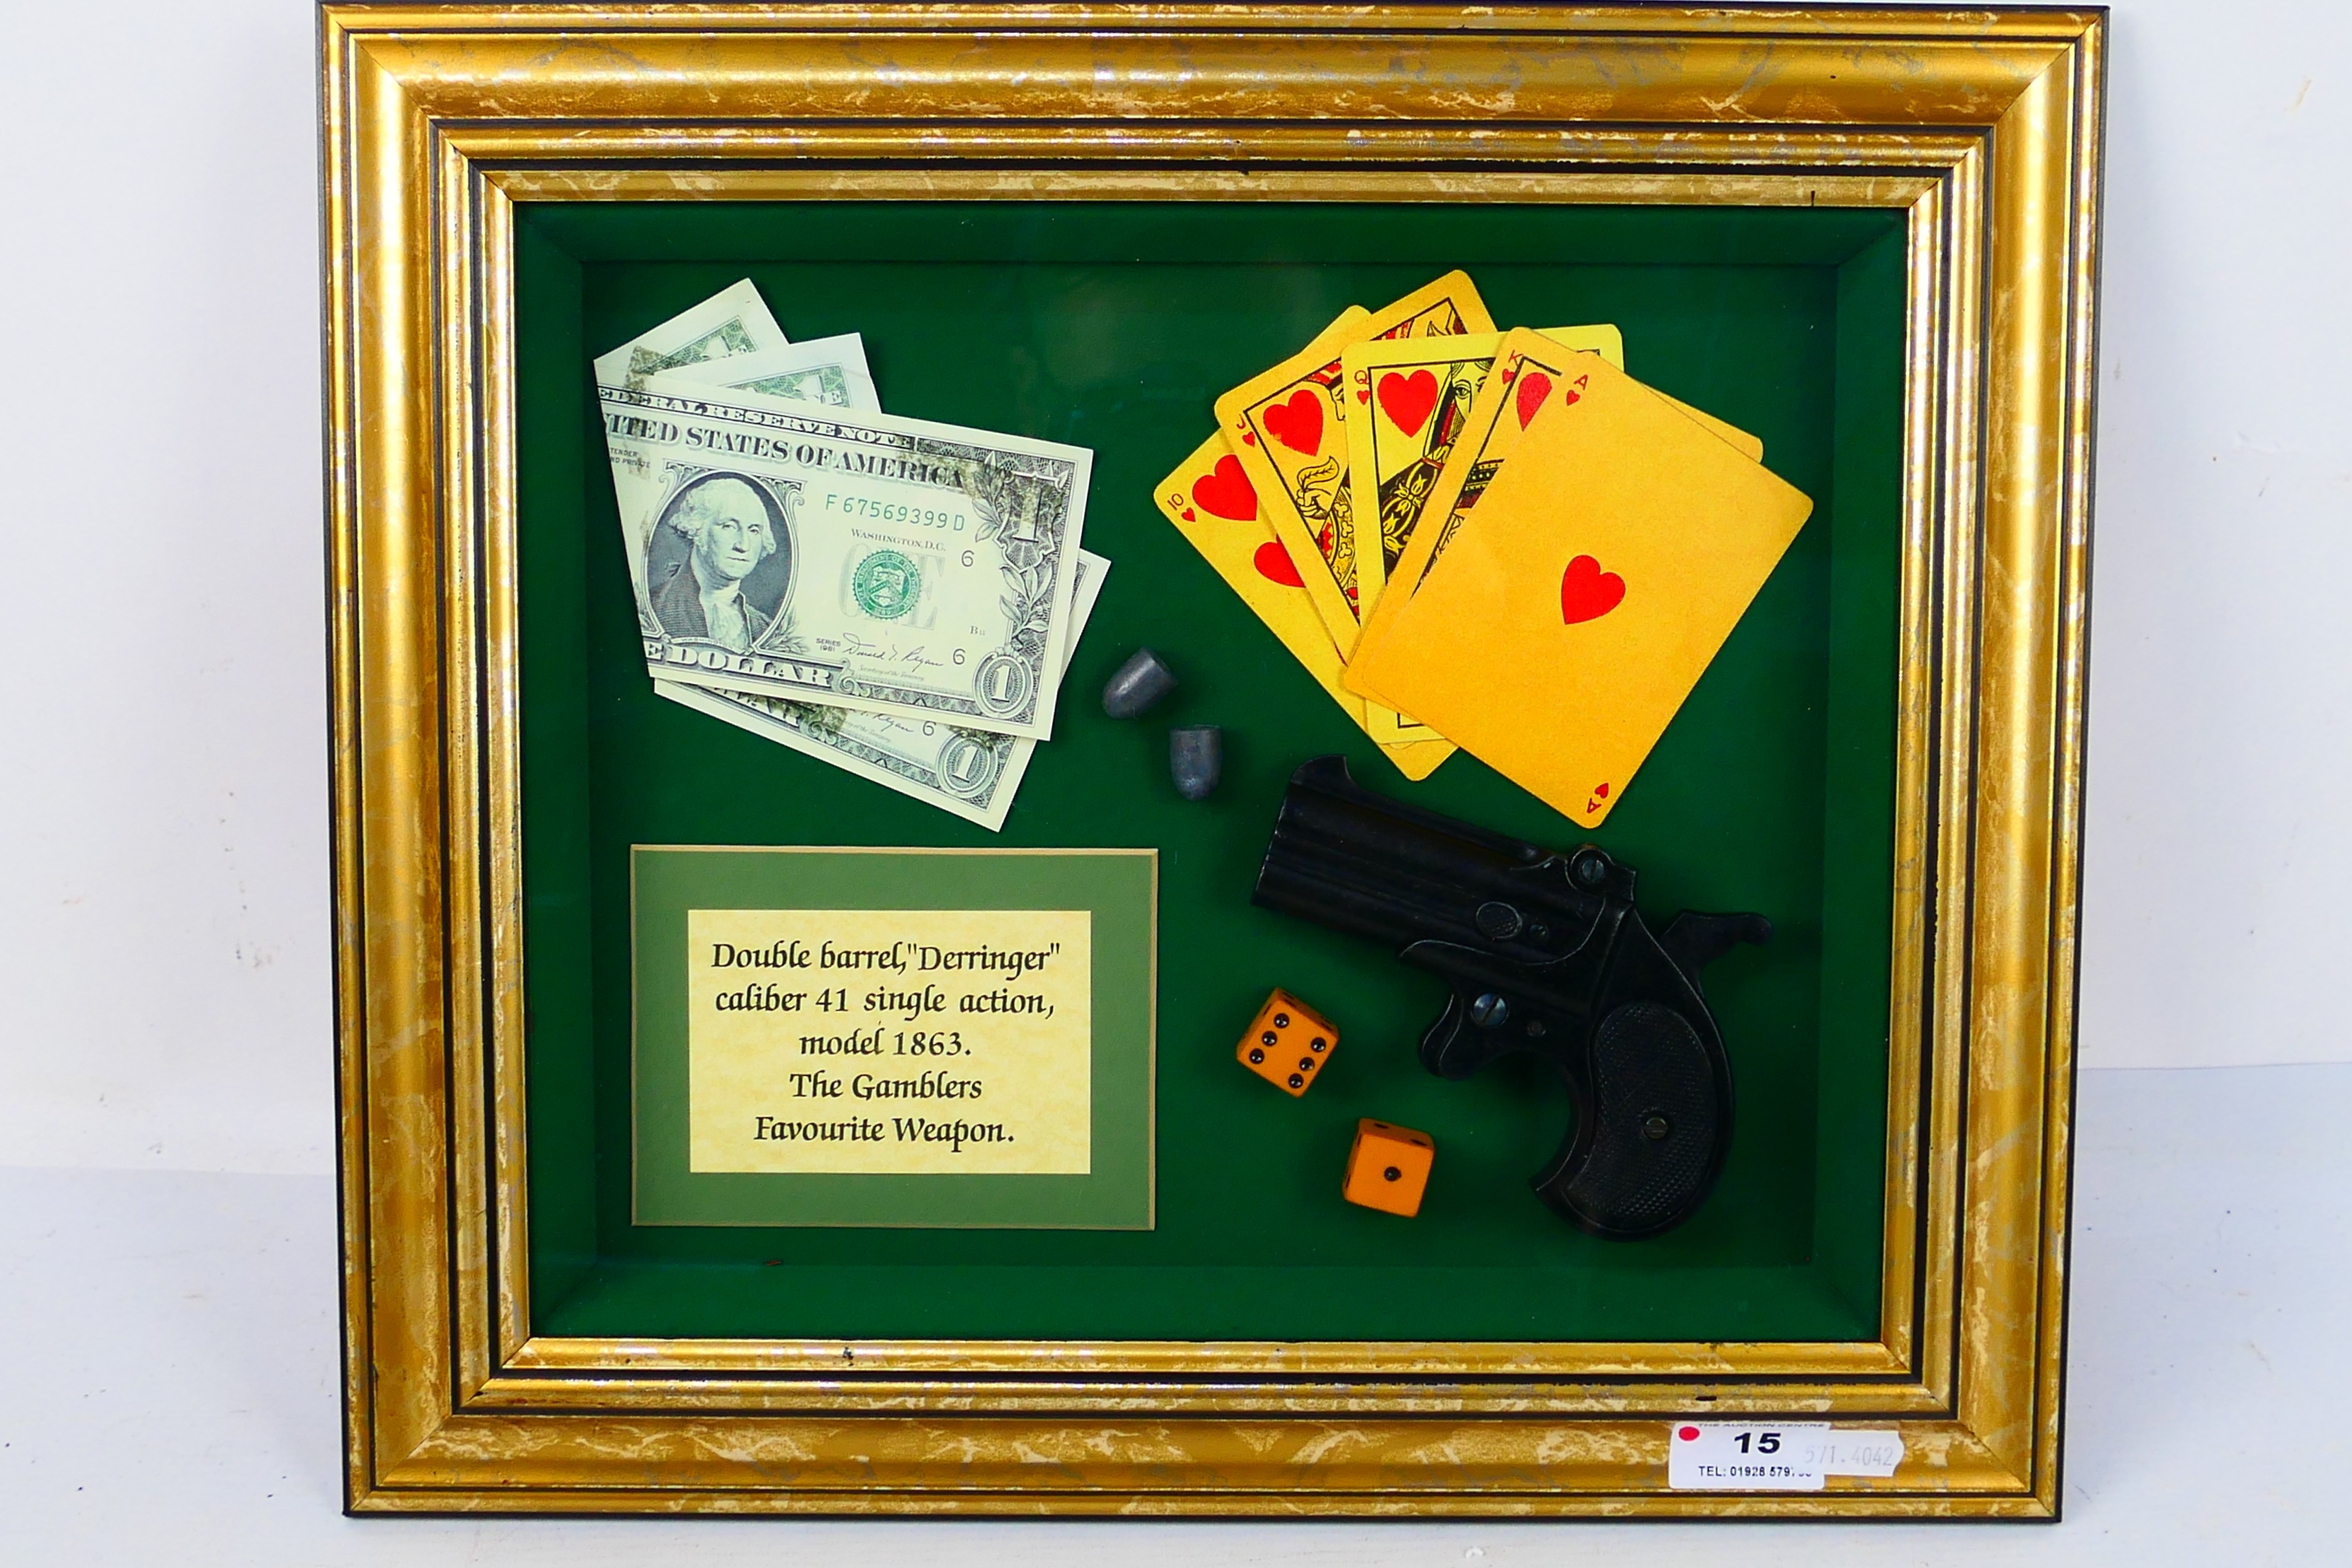 A framed display of a reproduction Derringer .